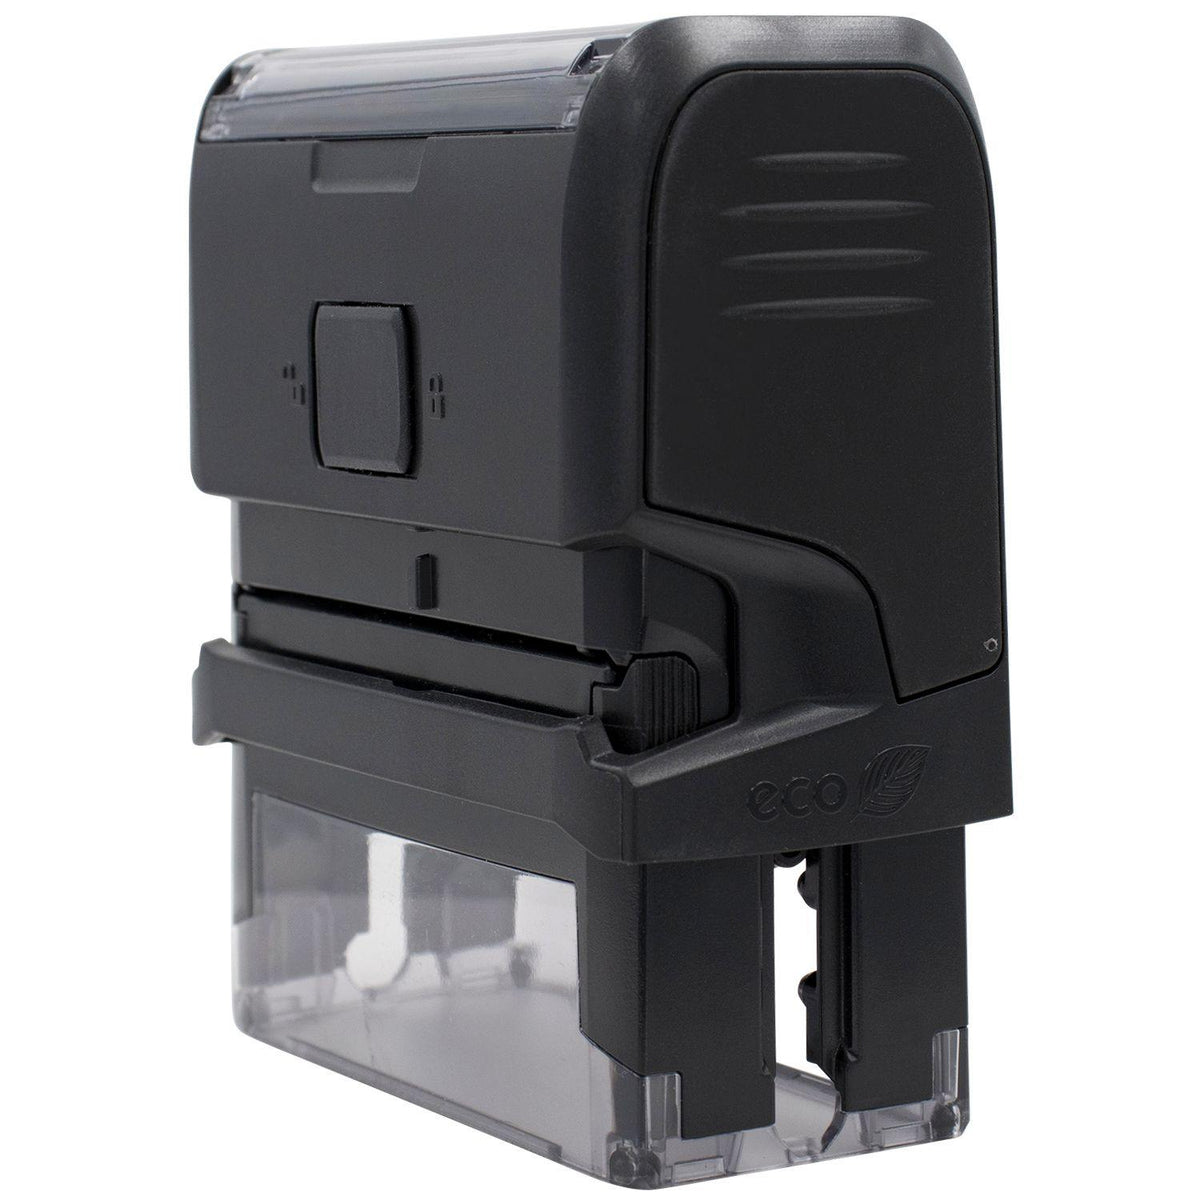 Large Self-Inking Deceased Stamp - Engineer Seal Stamps - Brand_Trodat, Impression Size_Large, Stamp Type_Self-Inking Stamp, Type of Use_Medical Office